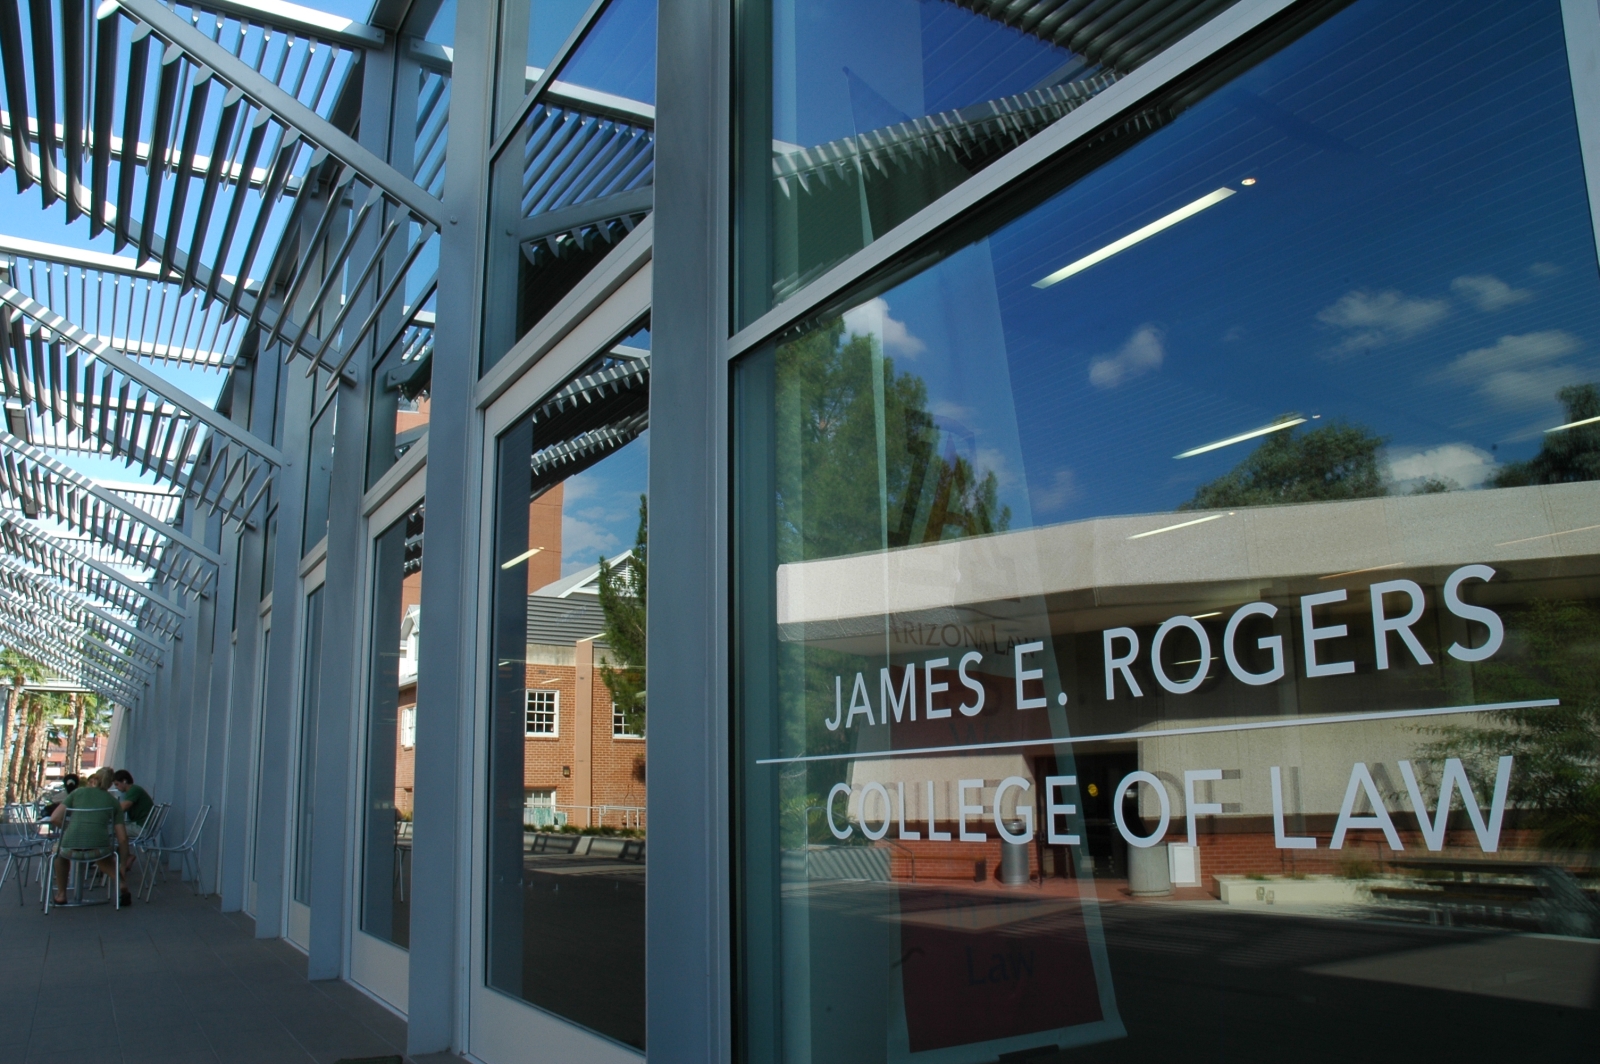 James E. Rogers College of Law sign on the glass window of the exterior of the University of Arizona Law building